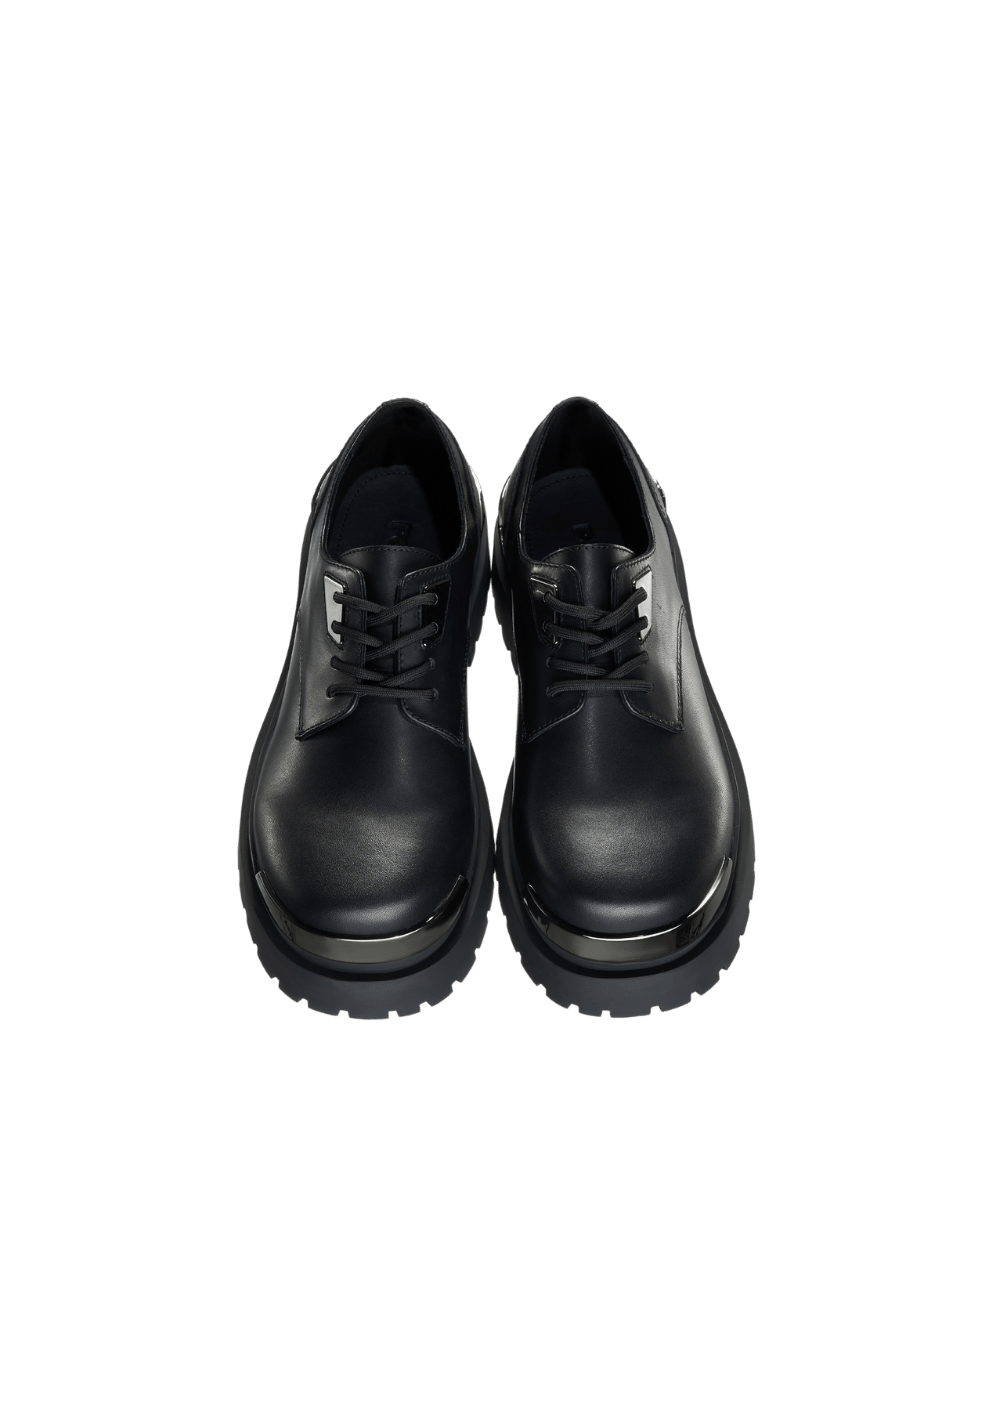 Derby Leather Shoes - PSYLOS 1, Derby Leather Shoes, Shoes, PCLP, PSYLOS 1